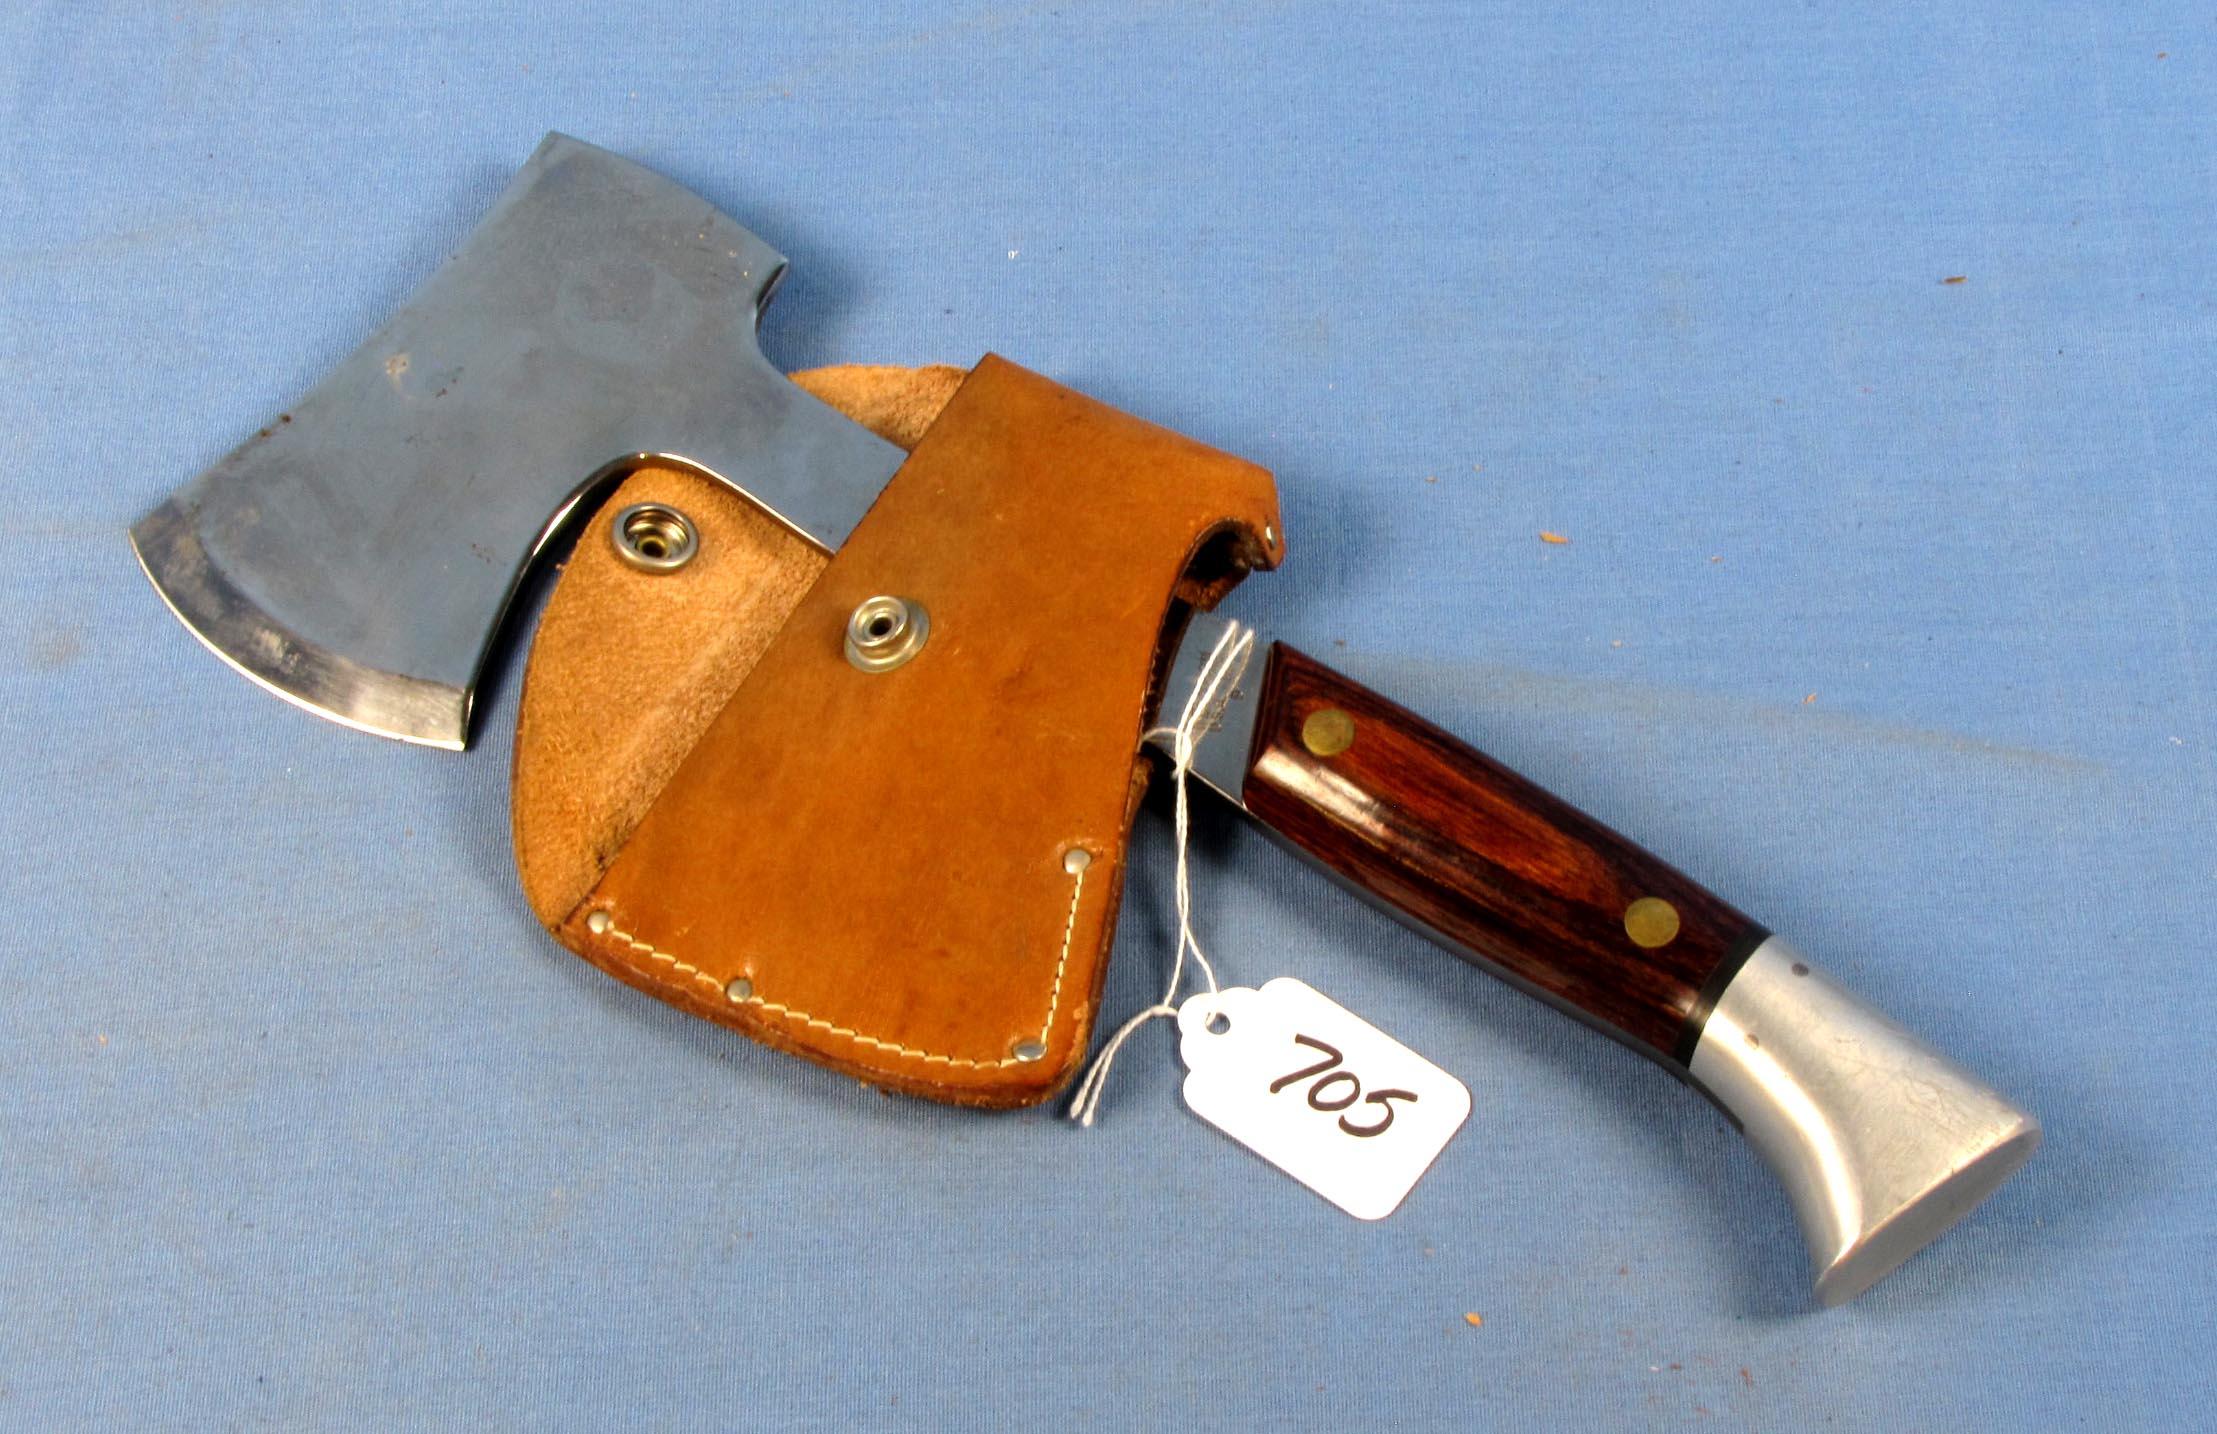 Western Camp Axe In Sheath; New Condition